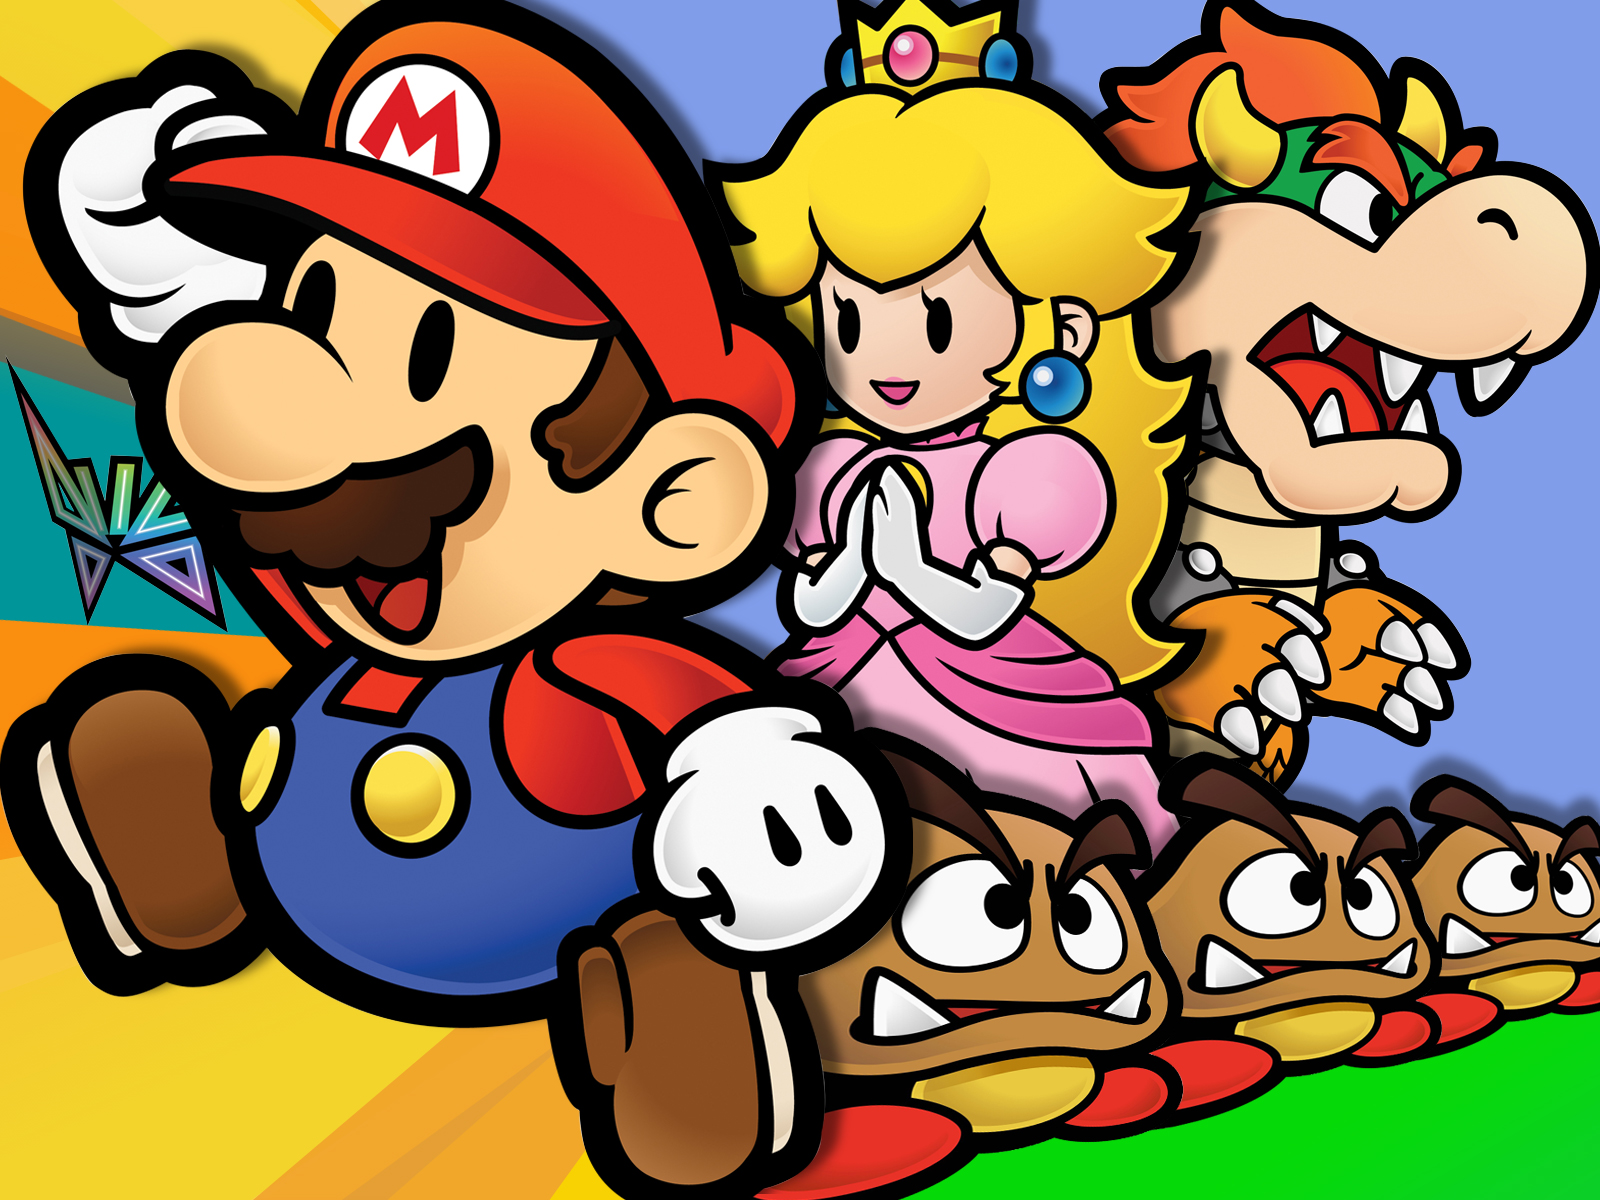 Paper Mario and Peach The Most Popular Game of 2020 You Must Know